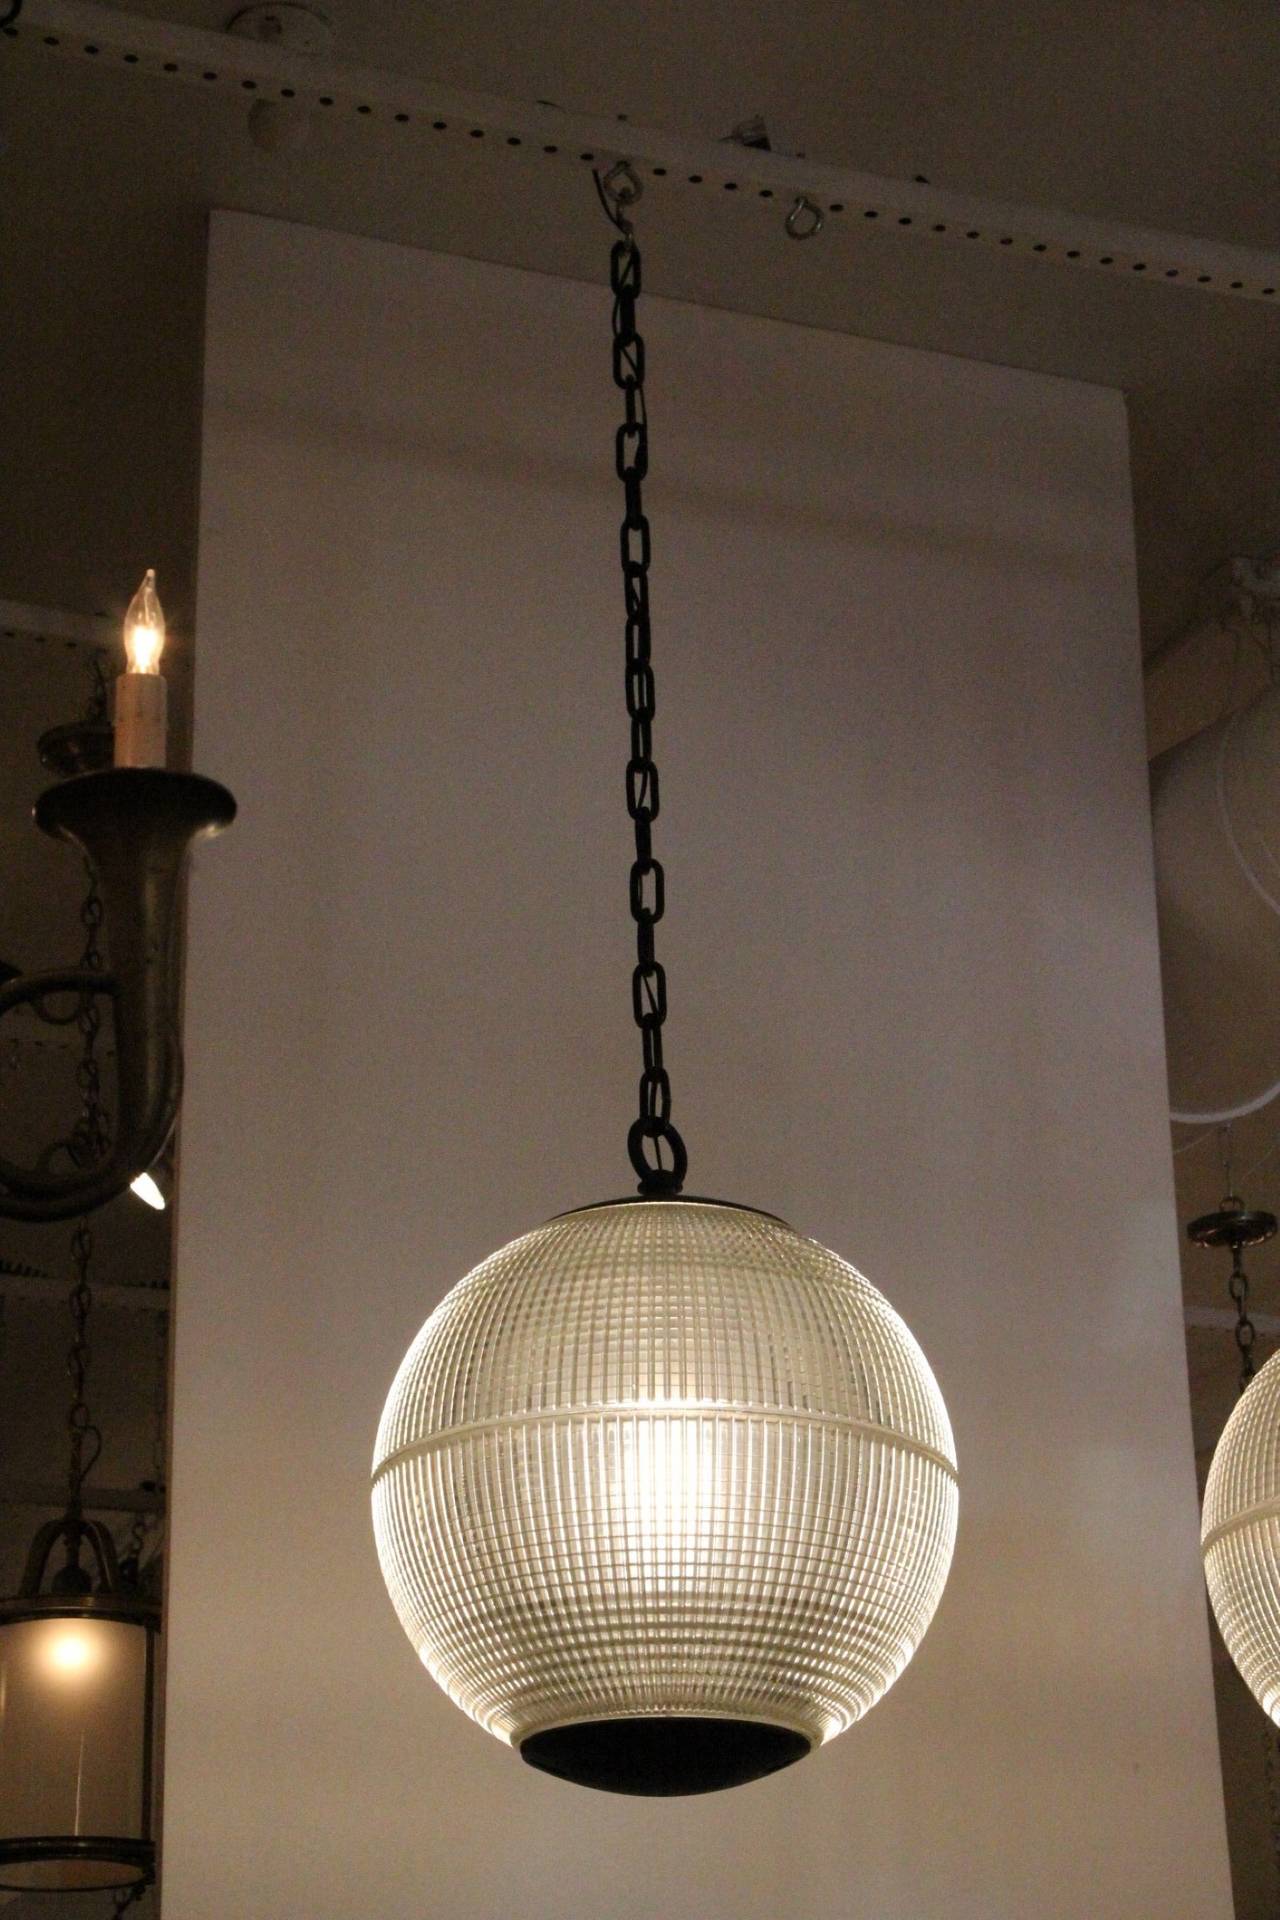 This is an original late 1960s Paris globe Holophane street light from Paris, France now turned into a pendant light. The hallmark of Holophane luminaries, or lighting fixtures, is the borosilicate glass reflector / refactor. The glass prisms (ribs)